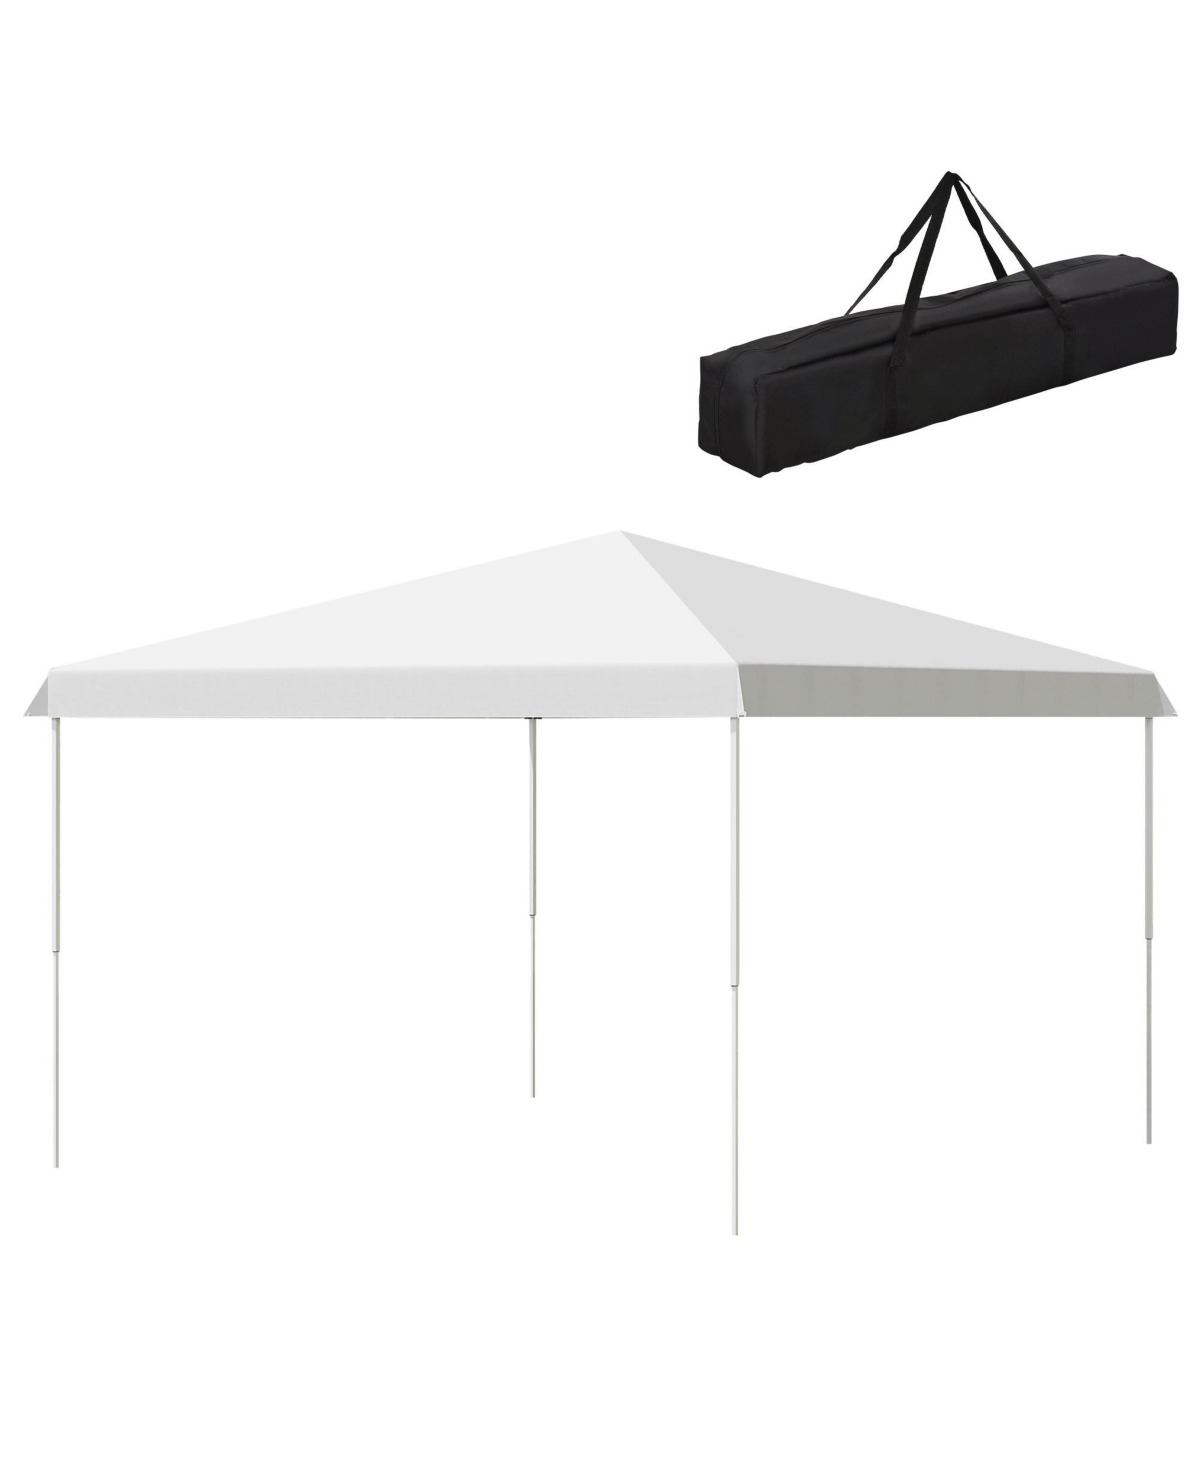 13' x 13' Pop-Up Gazebo Tent with 3-Level Adjustable Height, Instant Canopy Sun Shade Shelter Folding, with Waterproof, Uv Resistant Top, Car